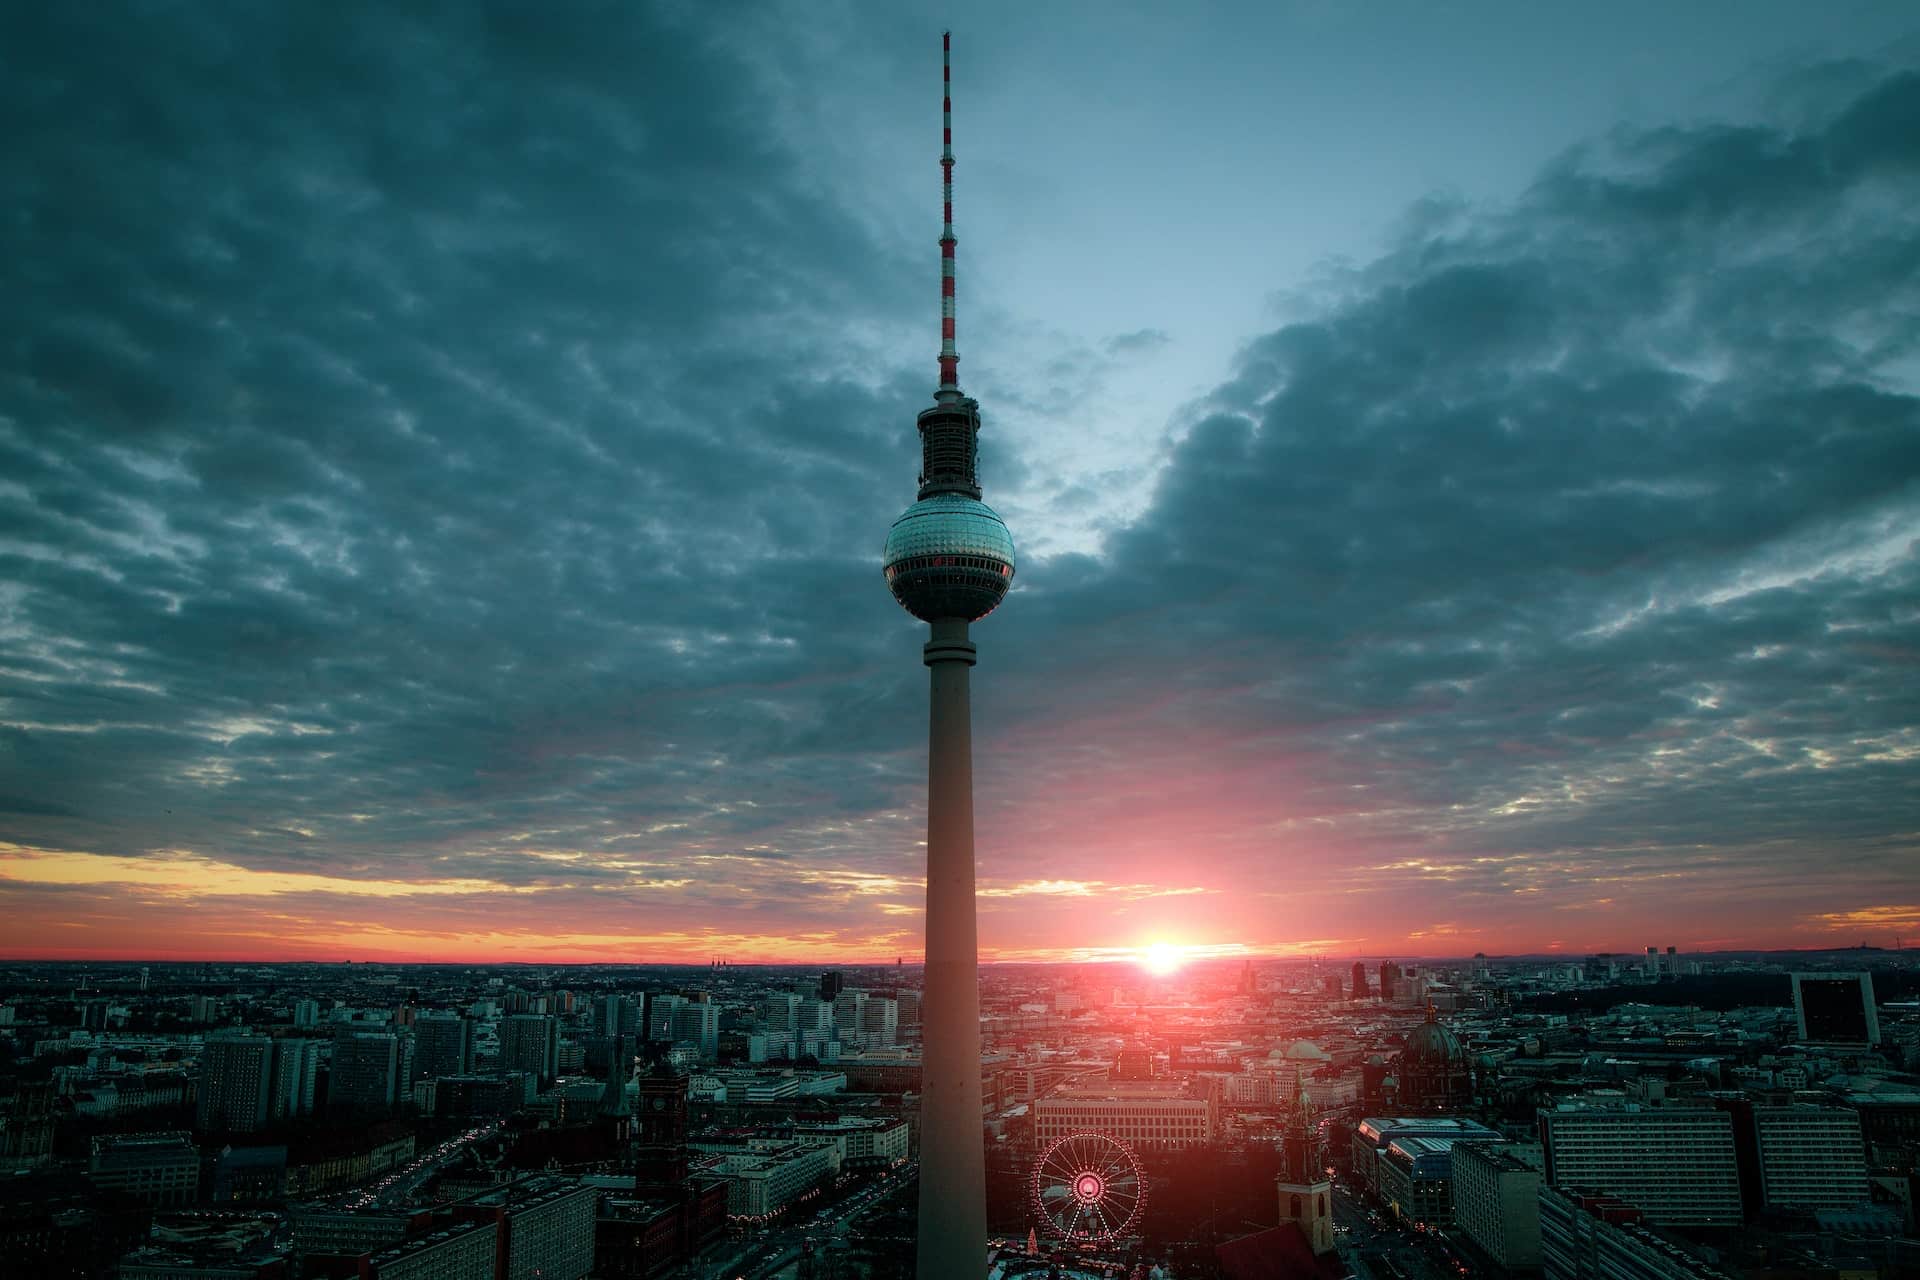 With the Fernsehturm as its defining feature, Alexanderplatz is Berlin's most iconic square